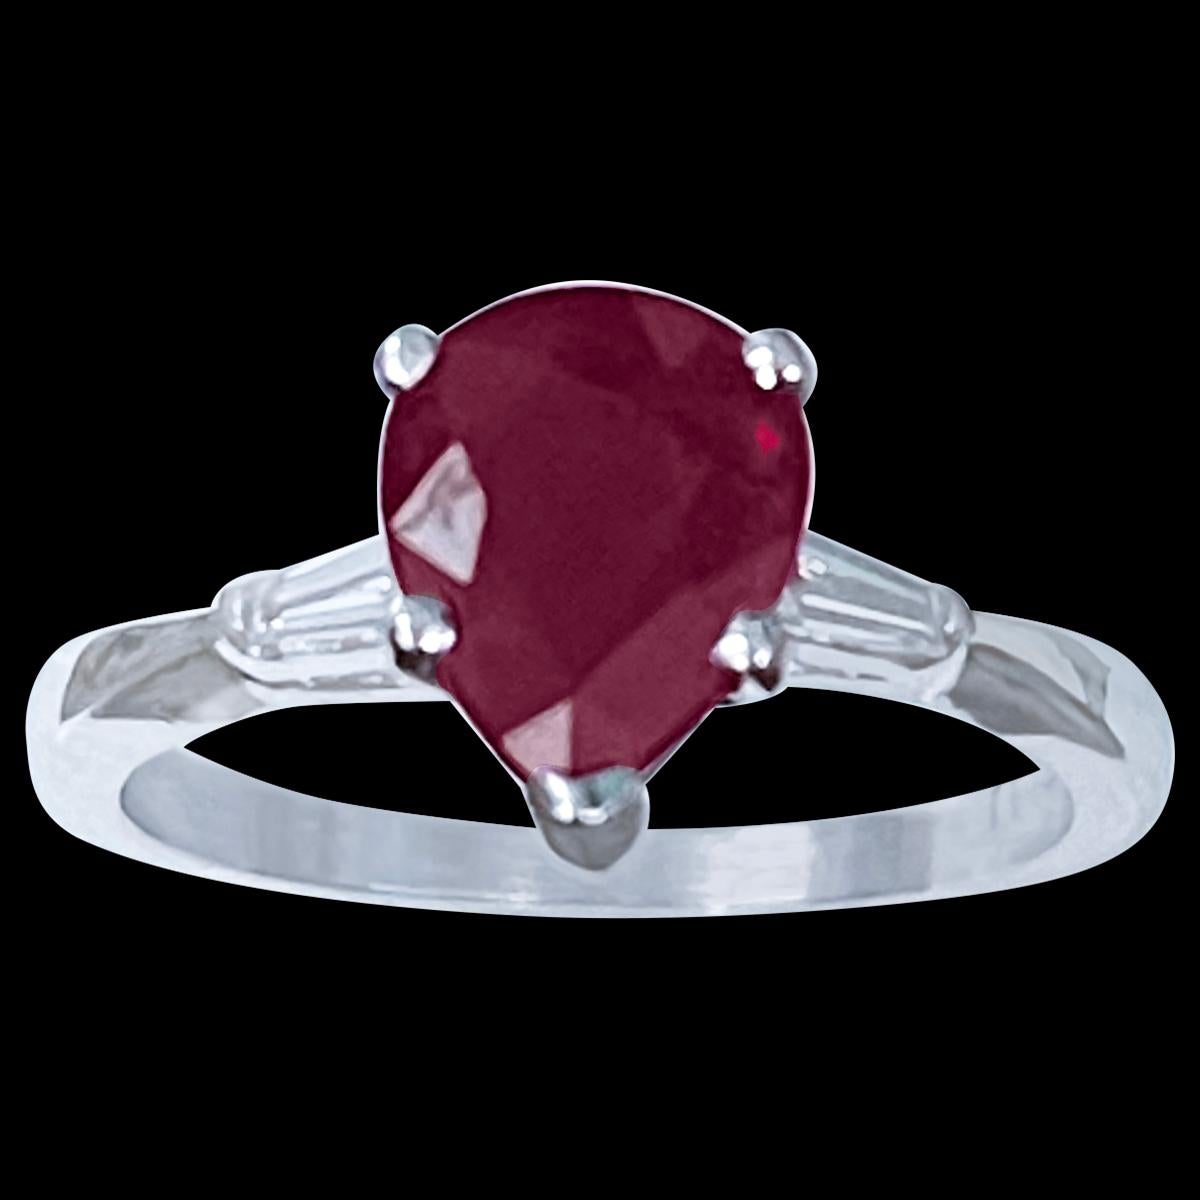 Pear Shape 2 Carat Treated Ruby & Diamond 14 Karat White  Gold Ring Size 6.5
Its a treated ruby
 prong set
14 Karat White  Gold: 3.5 gram
Measurement 9X7
two diamond baguettes , one on each side of the ruby 
Ring Size 6.5 ( can be altered for no